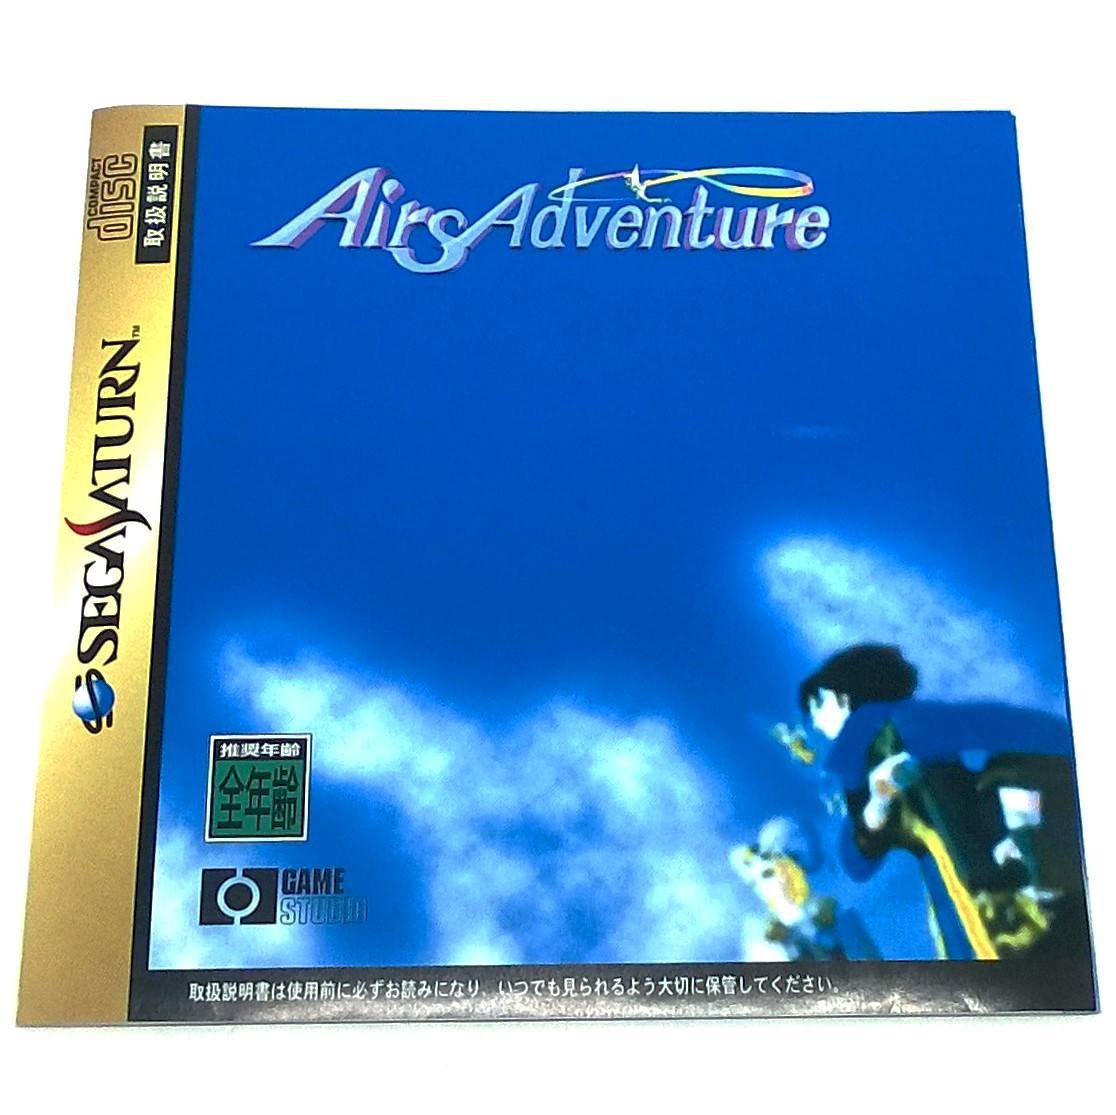 Airs Adventure for Saturn (import) - Front of manual